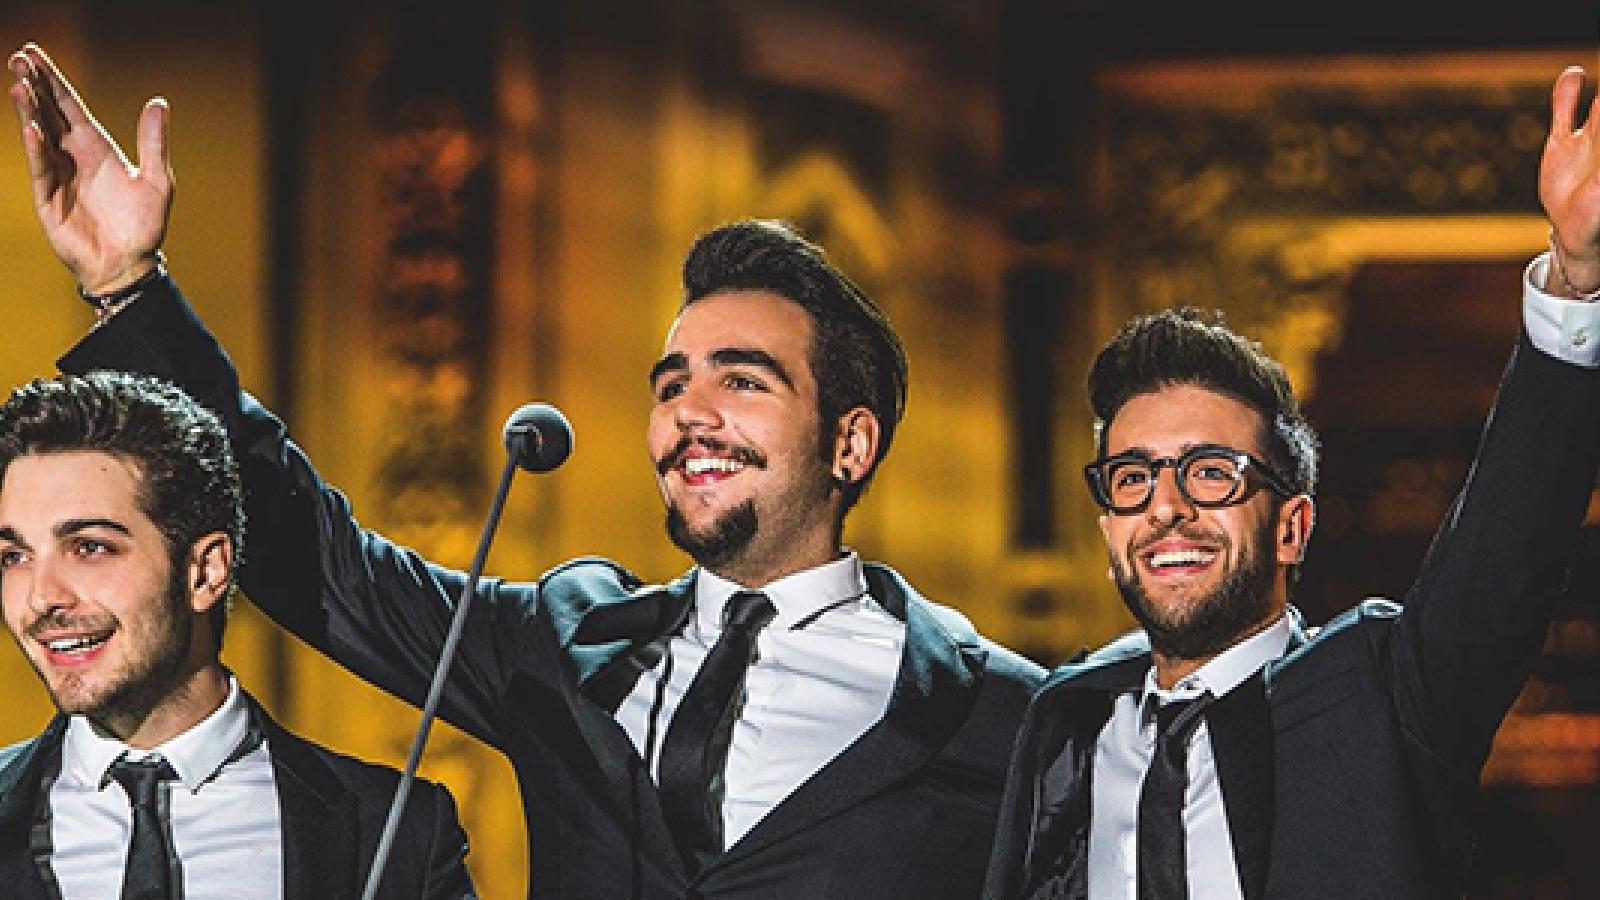 Il Volo in Concert at Civic Opera House WTTW Chicago